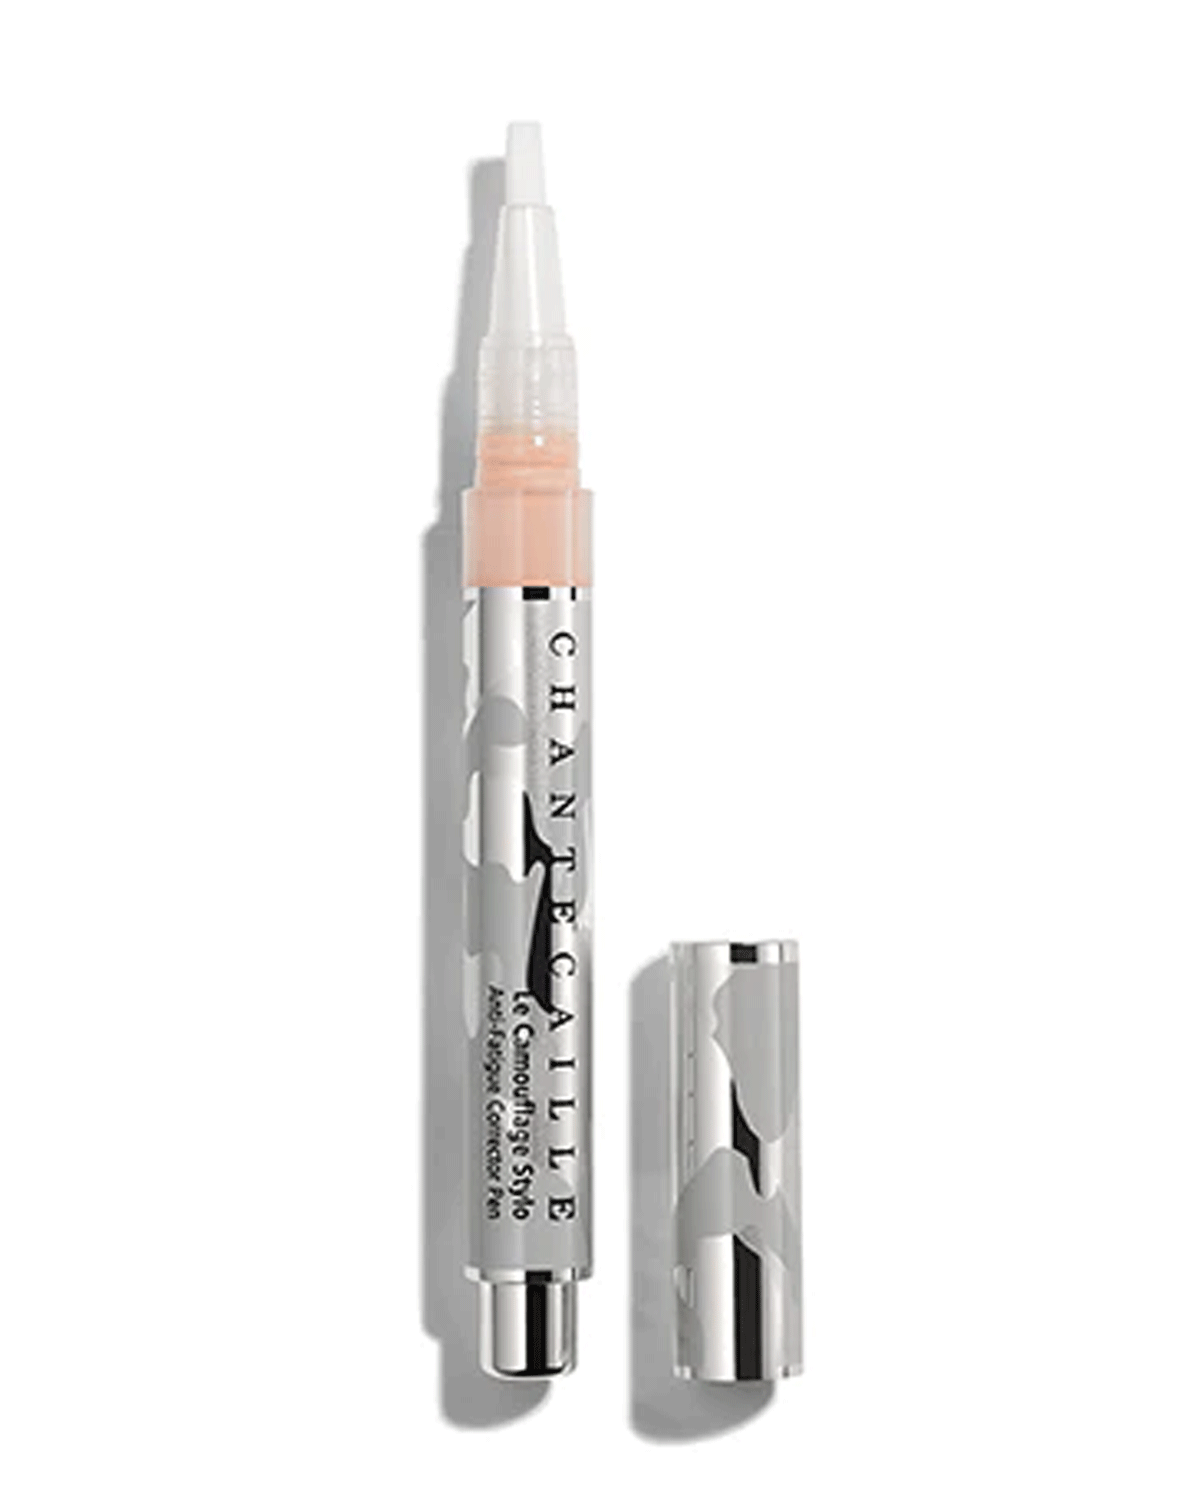 Le Camouflage Stylo in Shade 1